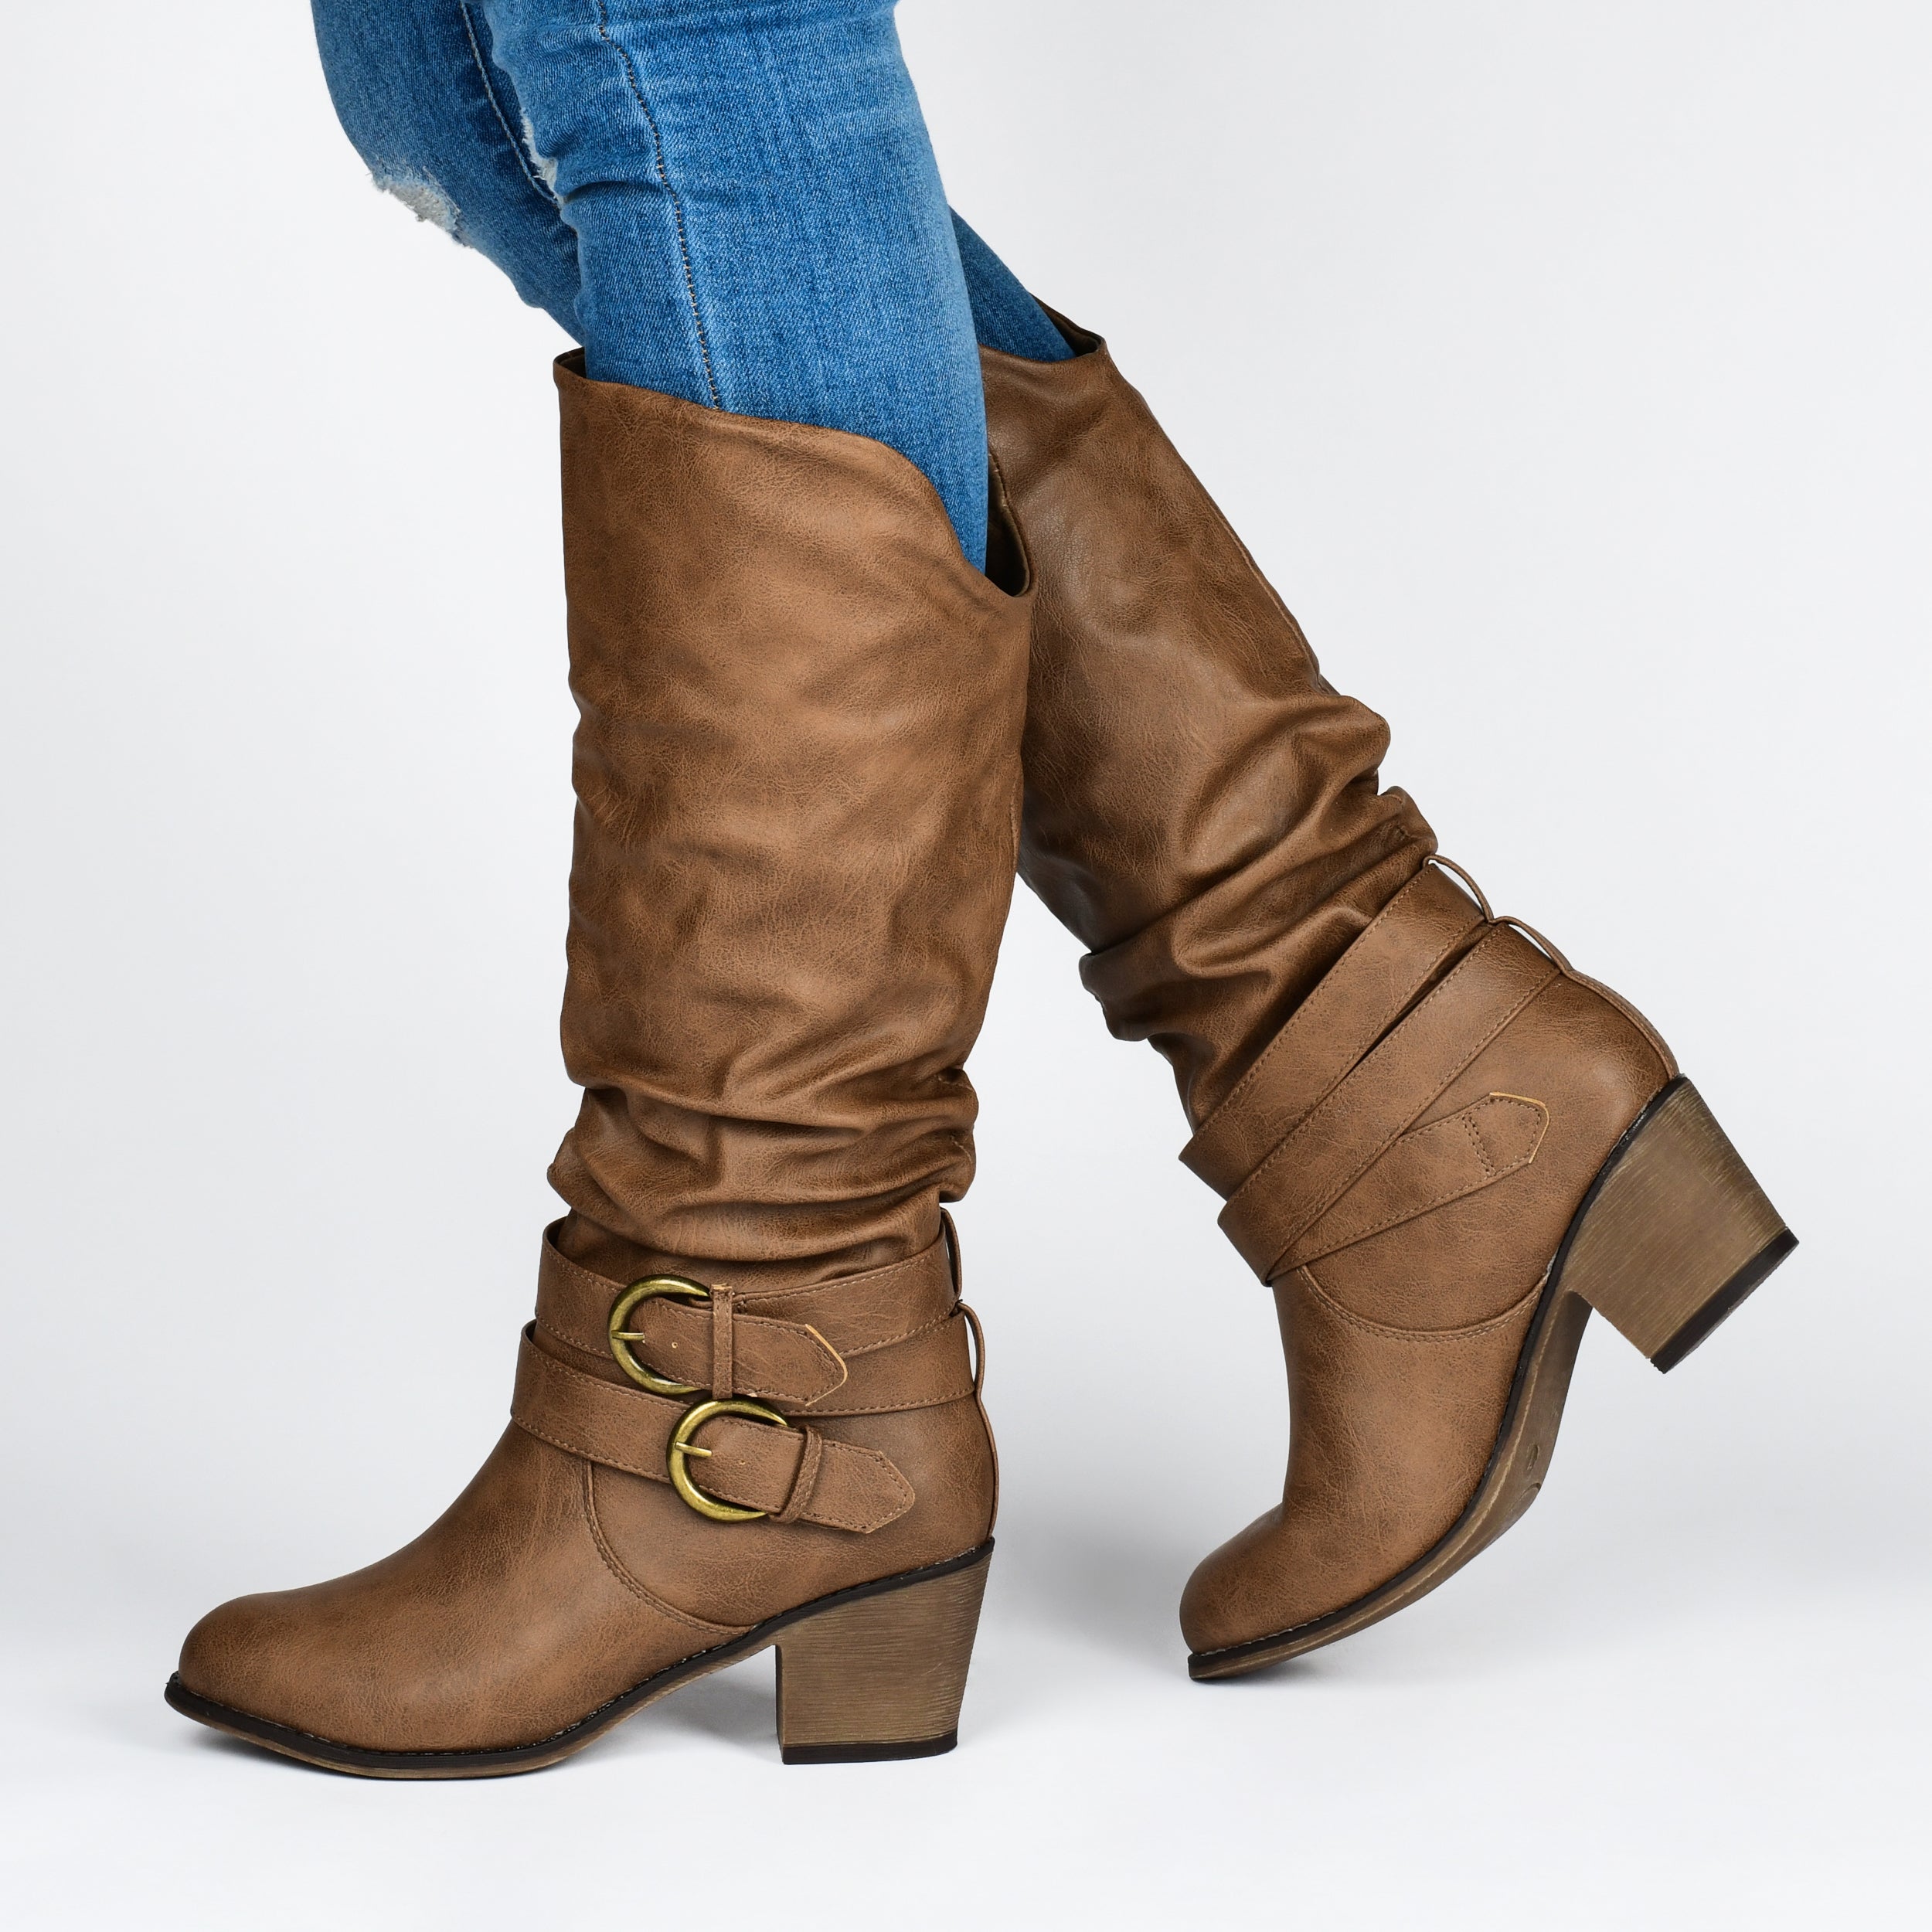 Late Boot | Women's Slouchy Boots | Journee Collection